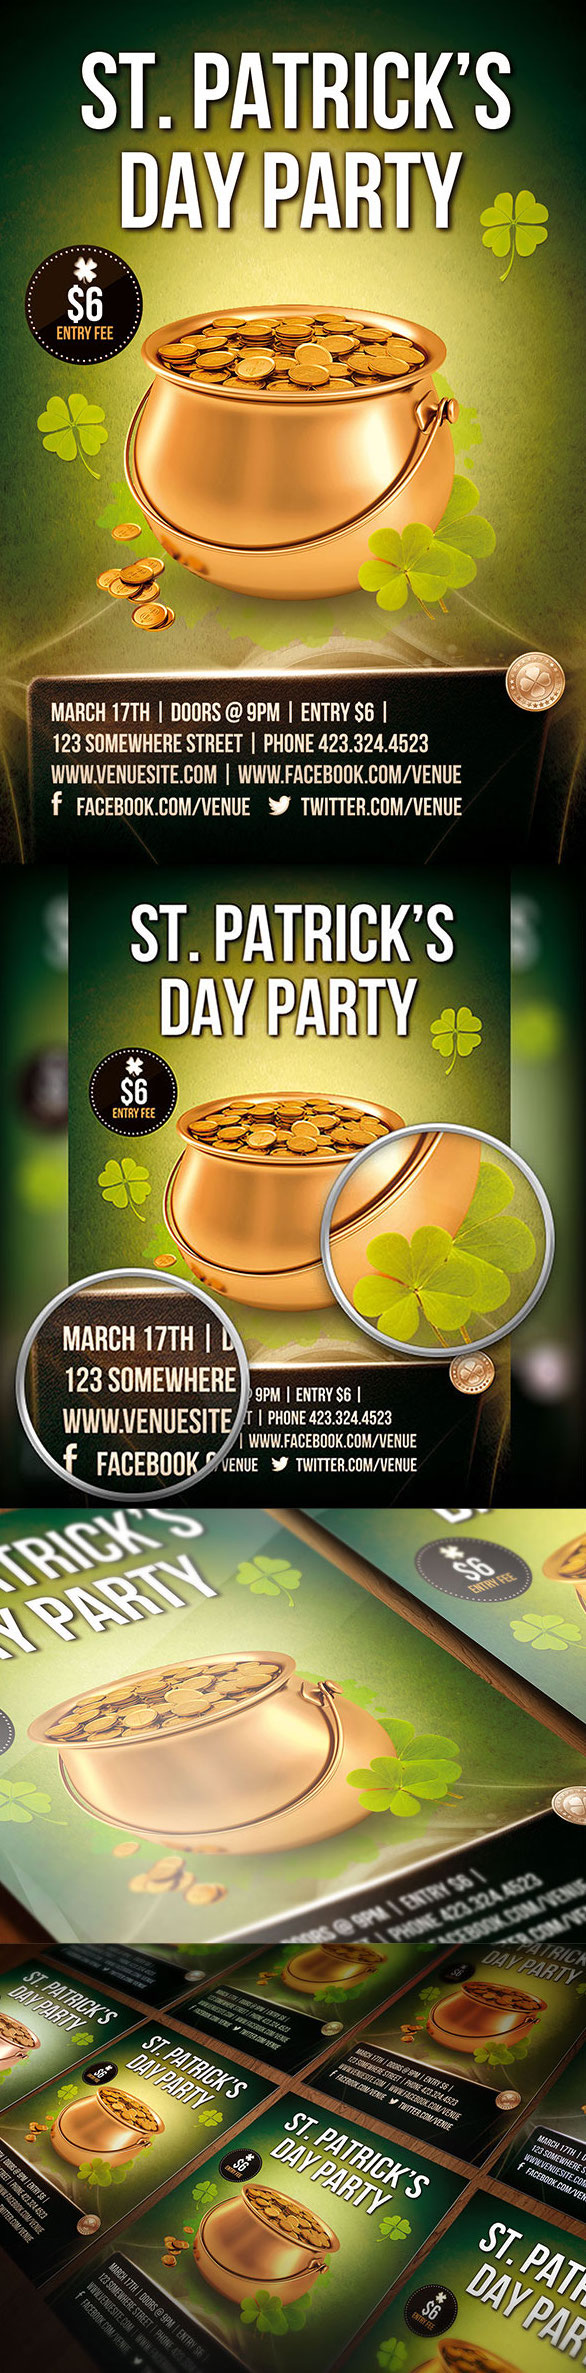 flyer St Patrick print party graphicriver xosquared